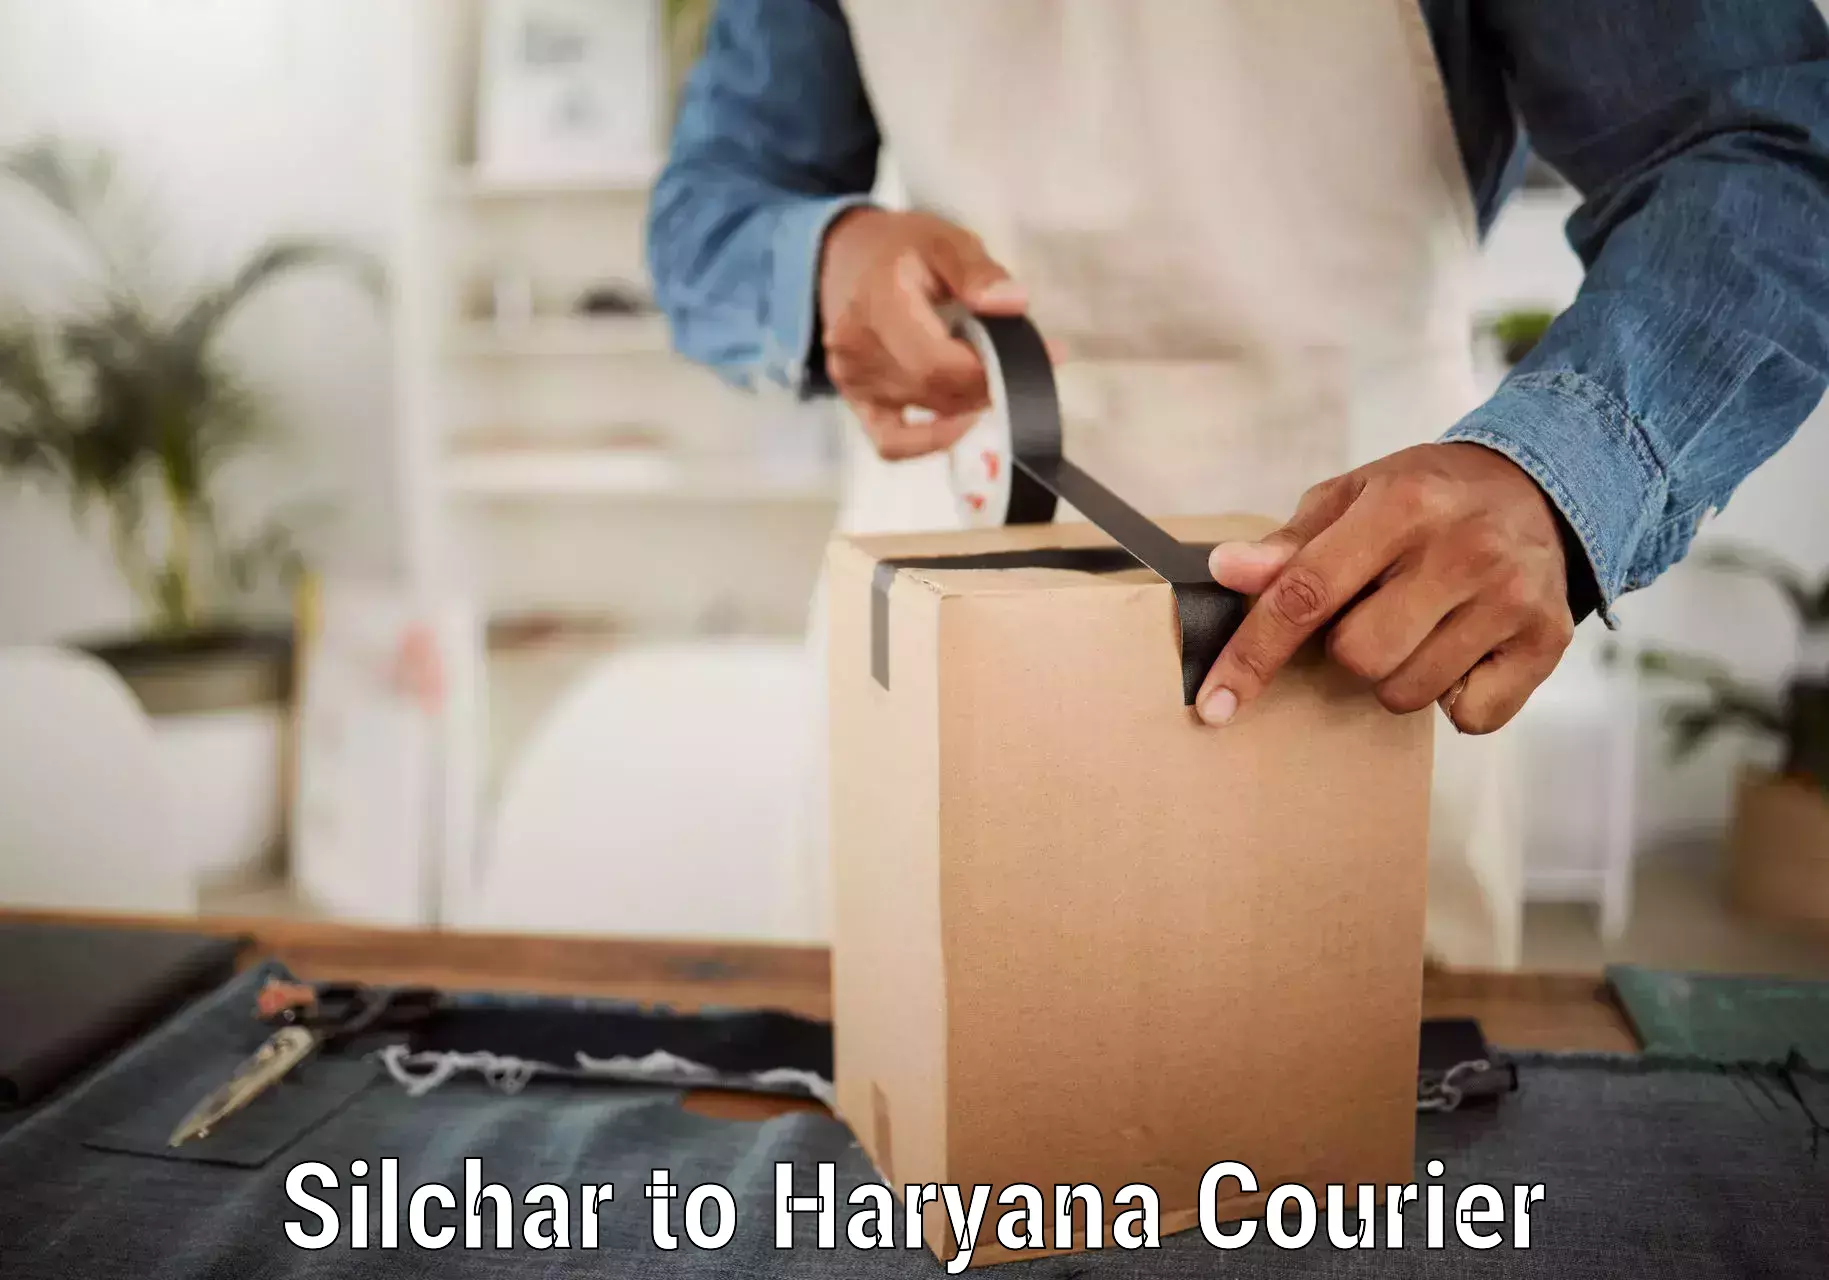 Next-generation courier services Silchar to Panipat